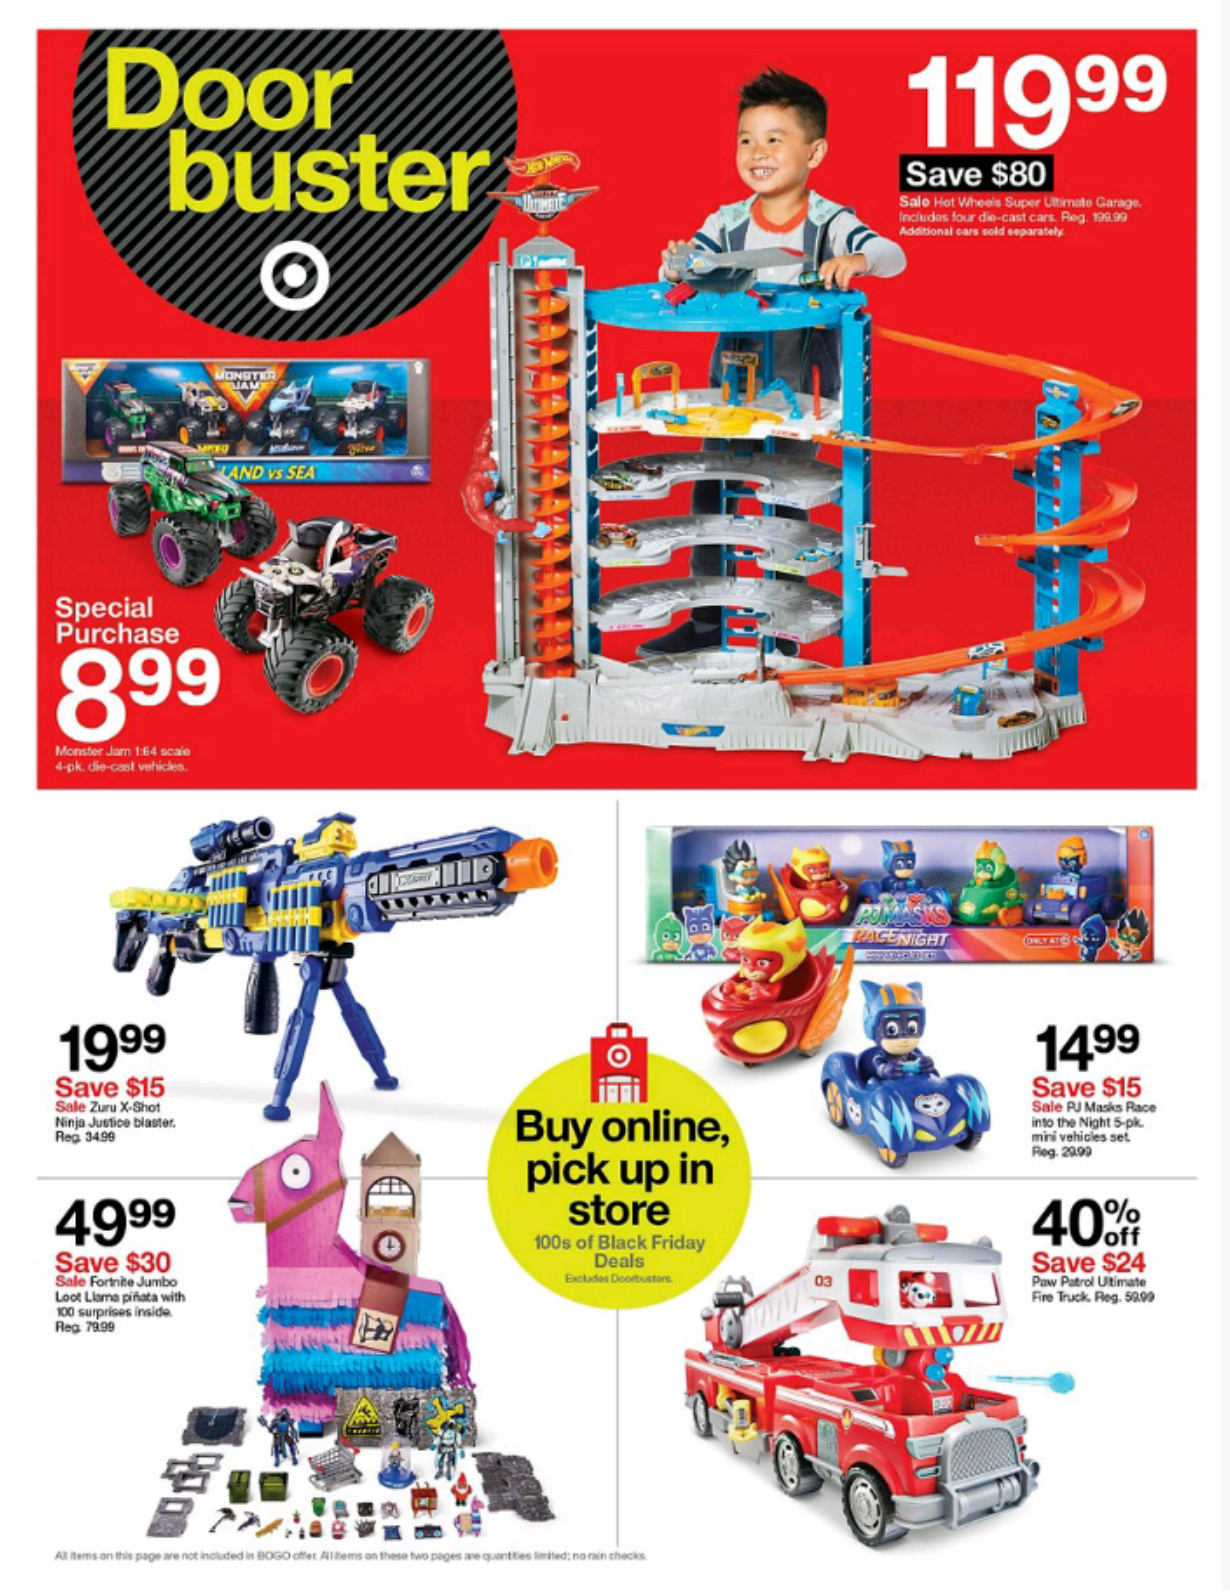 It’s Here! 2019 Target Black Friday Ad Preview - Page 6 of 13 - nrd.kbic-nsn.gov